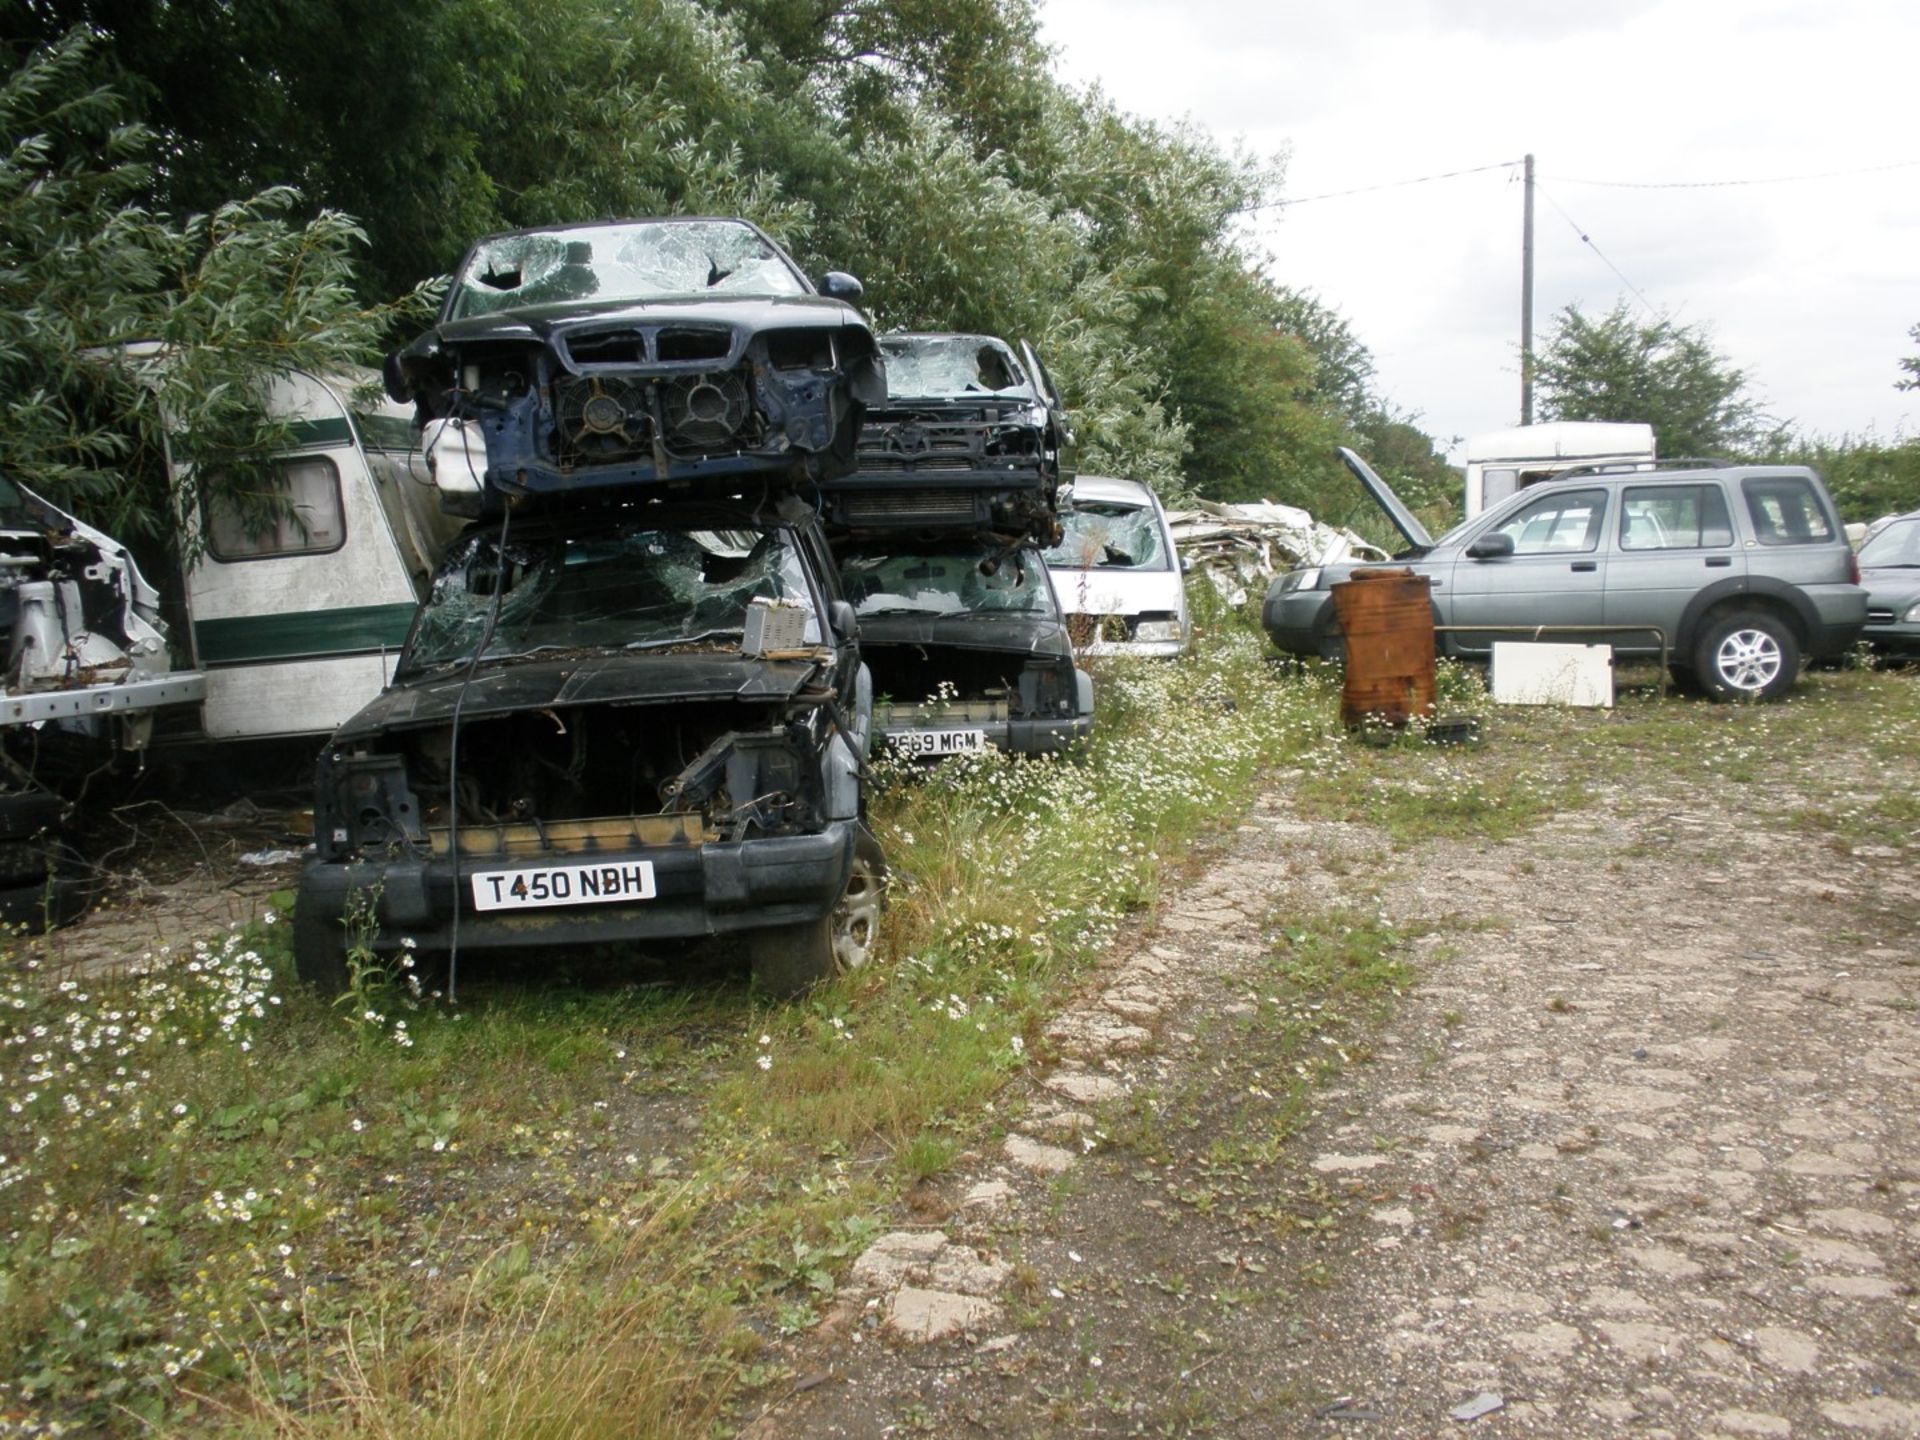 The Residual Scrap Vehicles on site together with other scrap hidden in the undergrowth. To include - Image 7 of 10